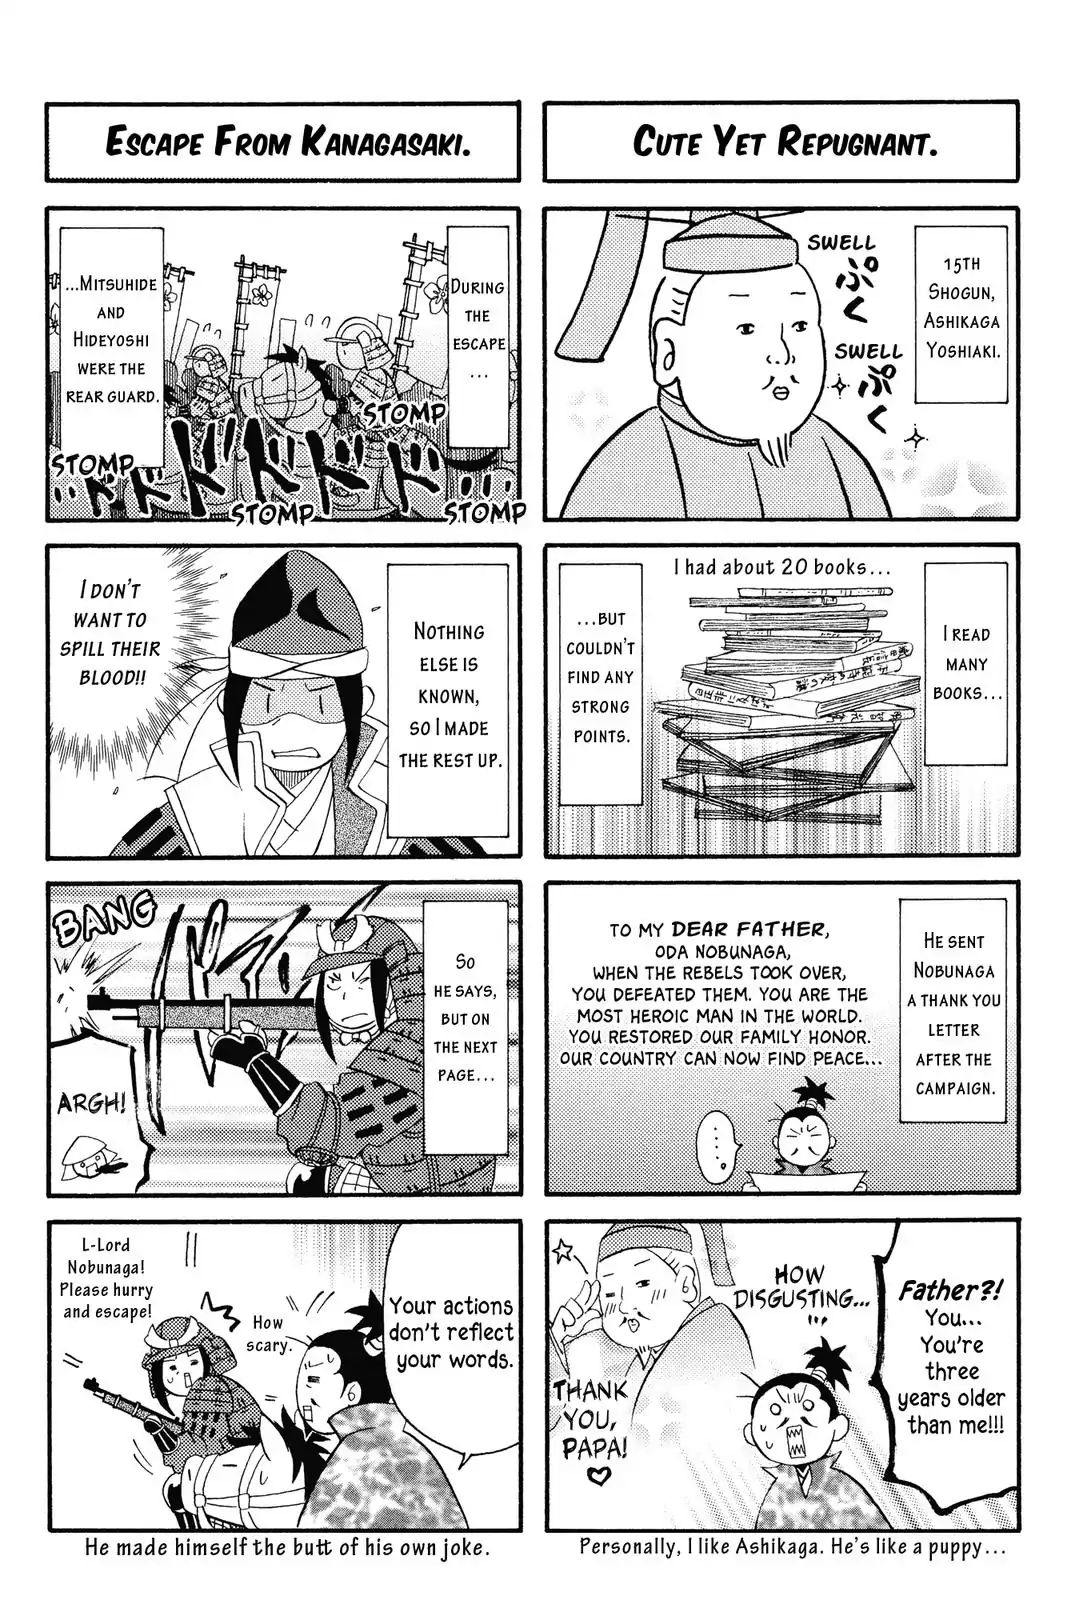 King's Moon - The Life Of Akechi Mitsuhide Chapter 5.5: Bonus Comic Shorts And Afterword [End] - Picture 3